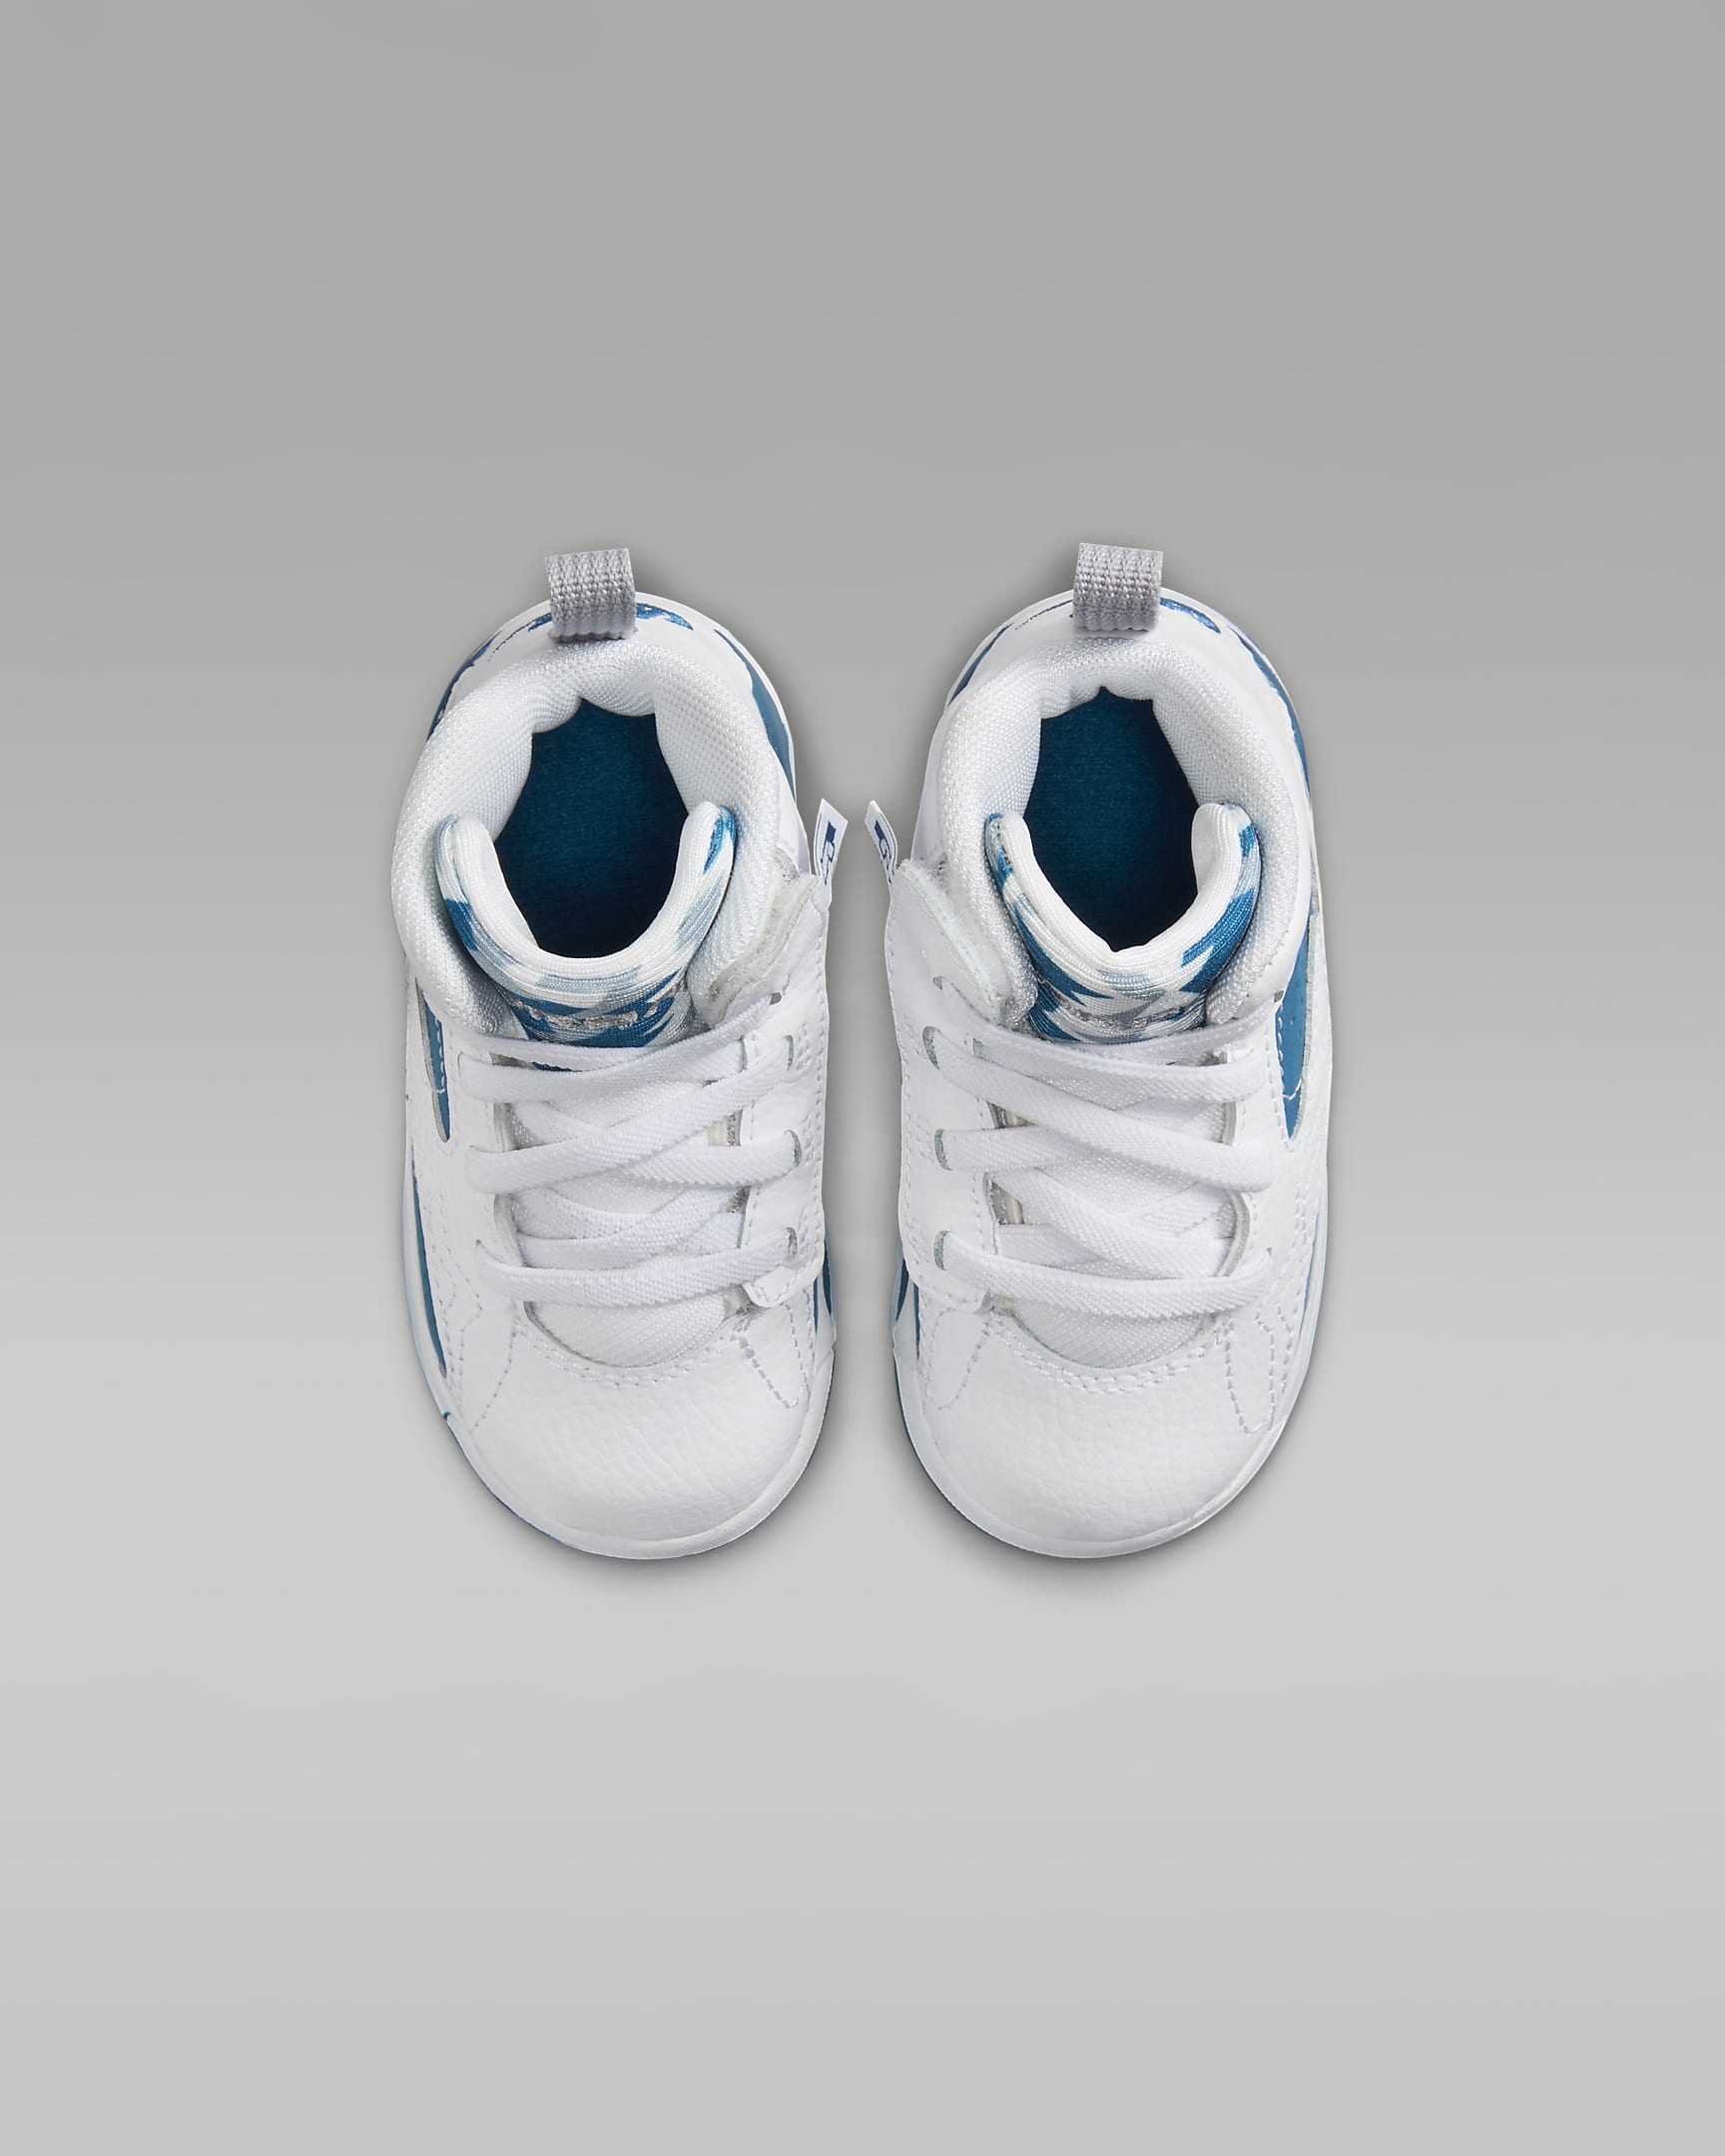 Jumpman MVP Baby/Toddler Shoes - White/Wolf Grey/Industrial Blue